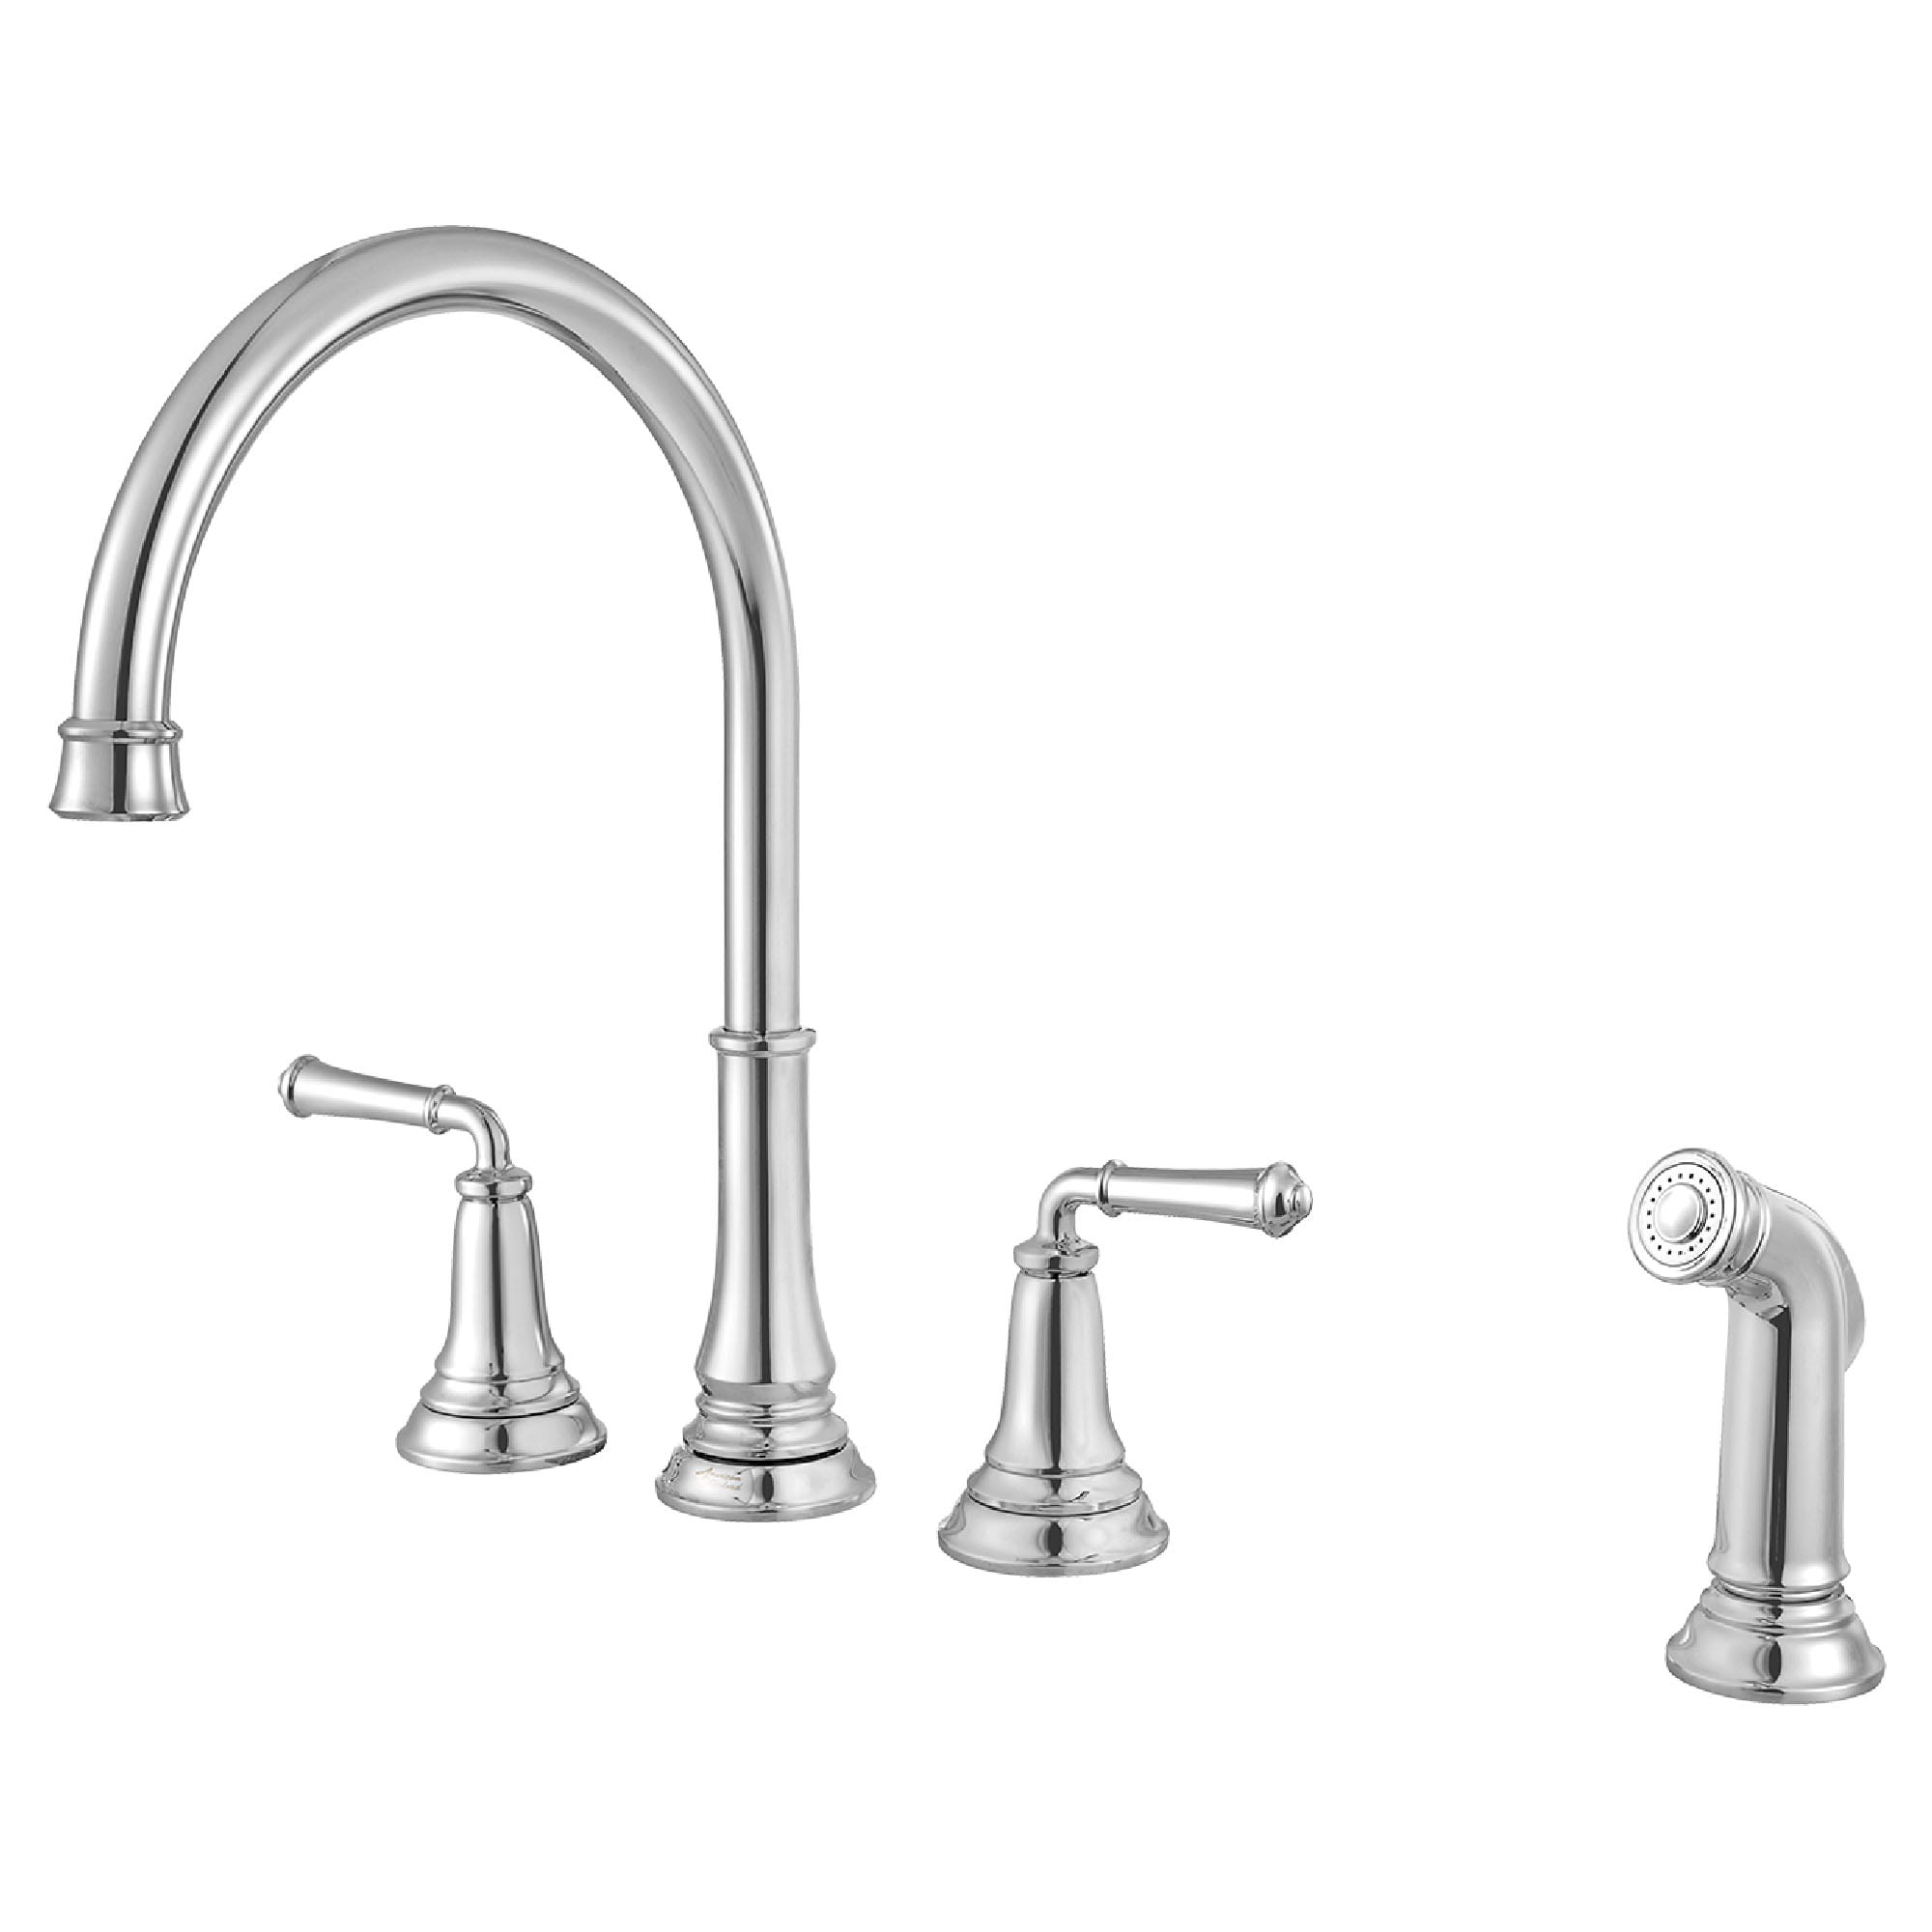 Delancey® 2-Handle Widespread Kitchen Faucet 1.5 gpm/5.7 L/min With Side Spray